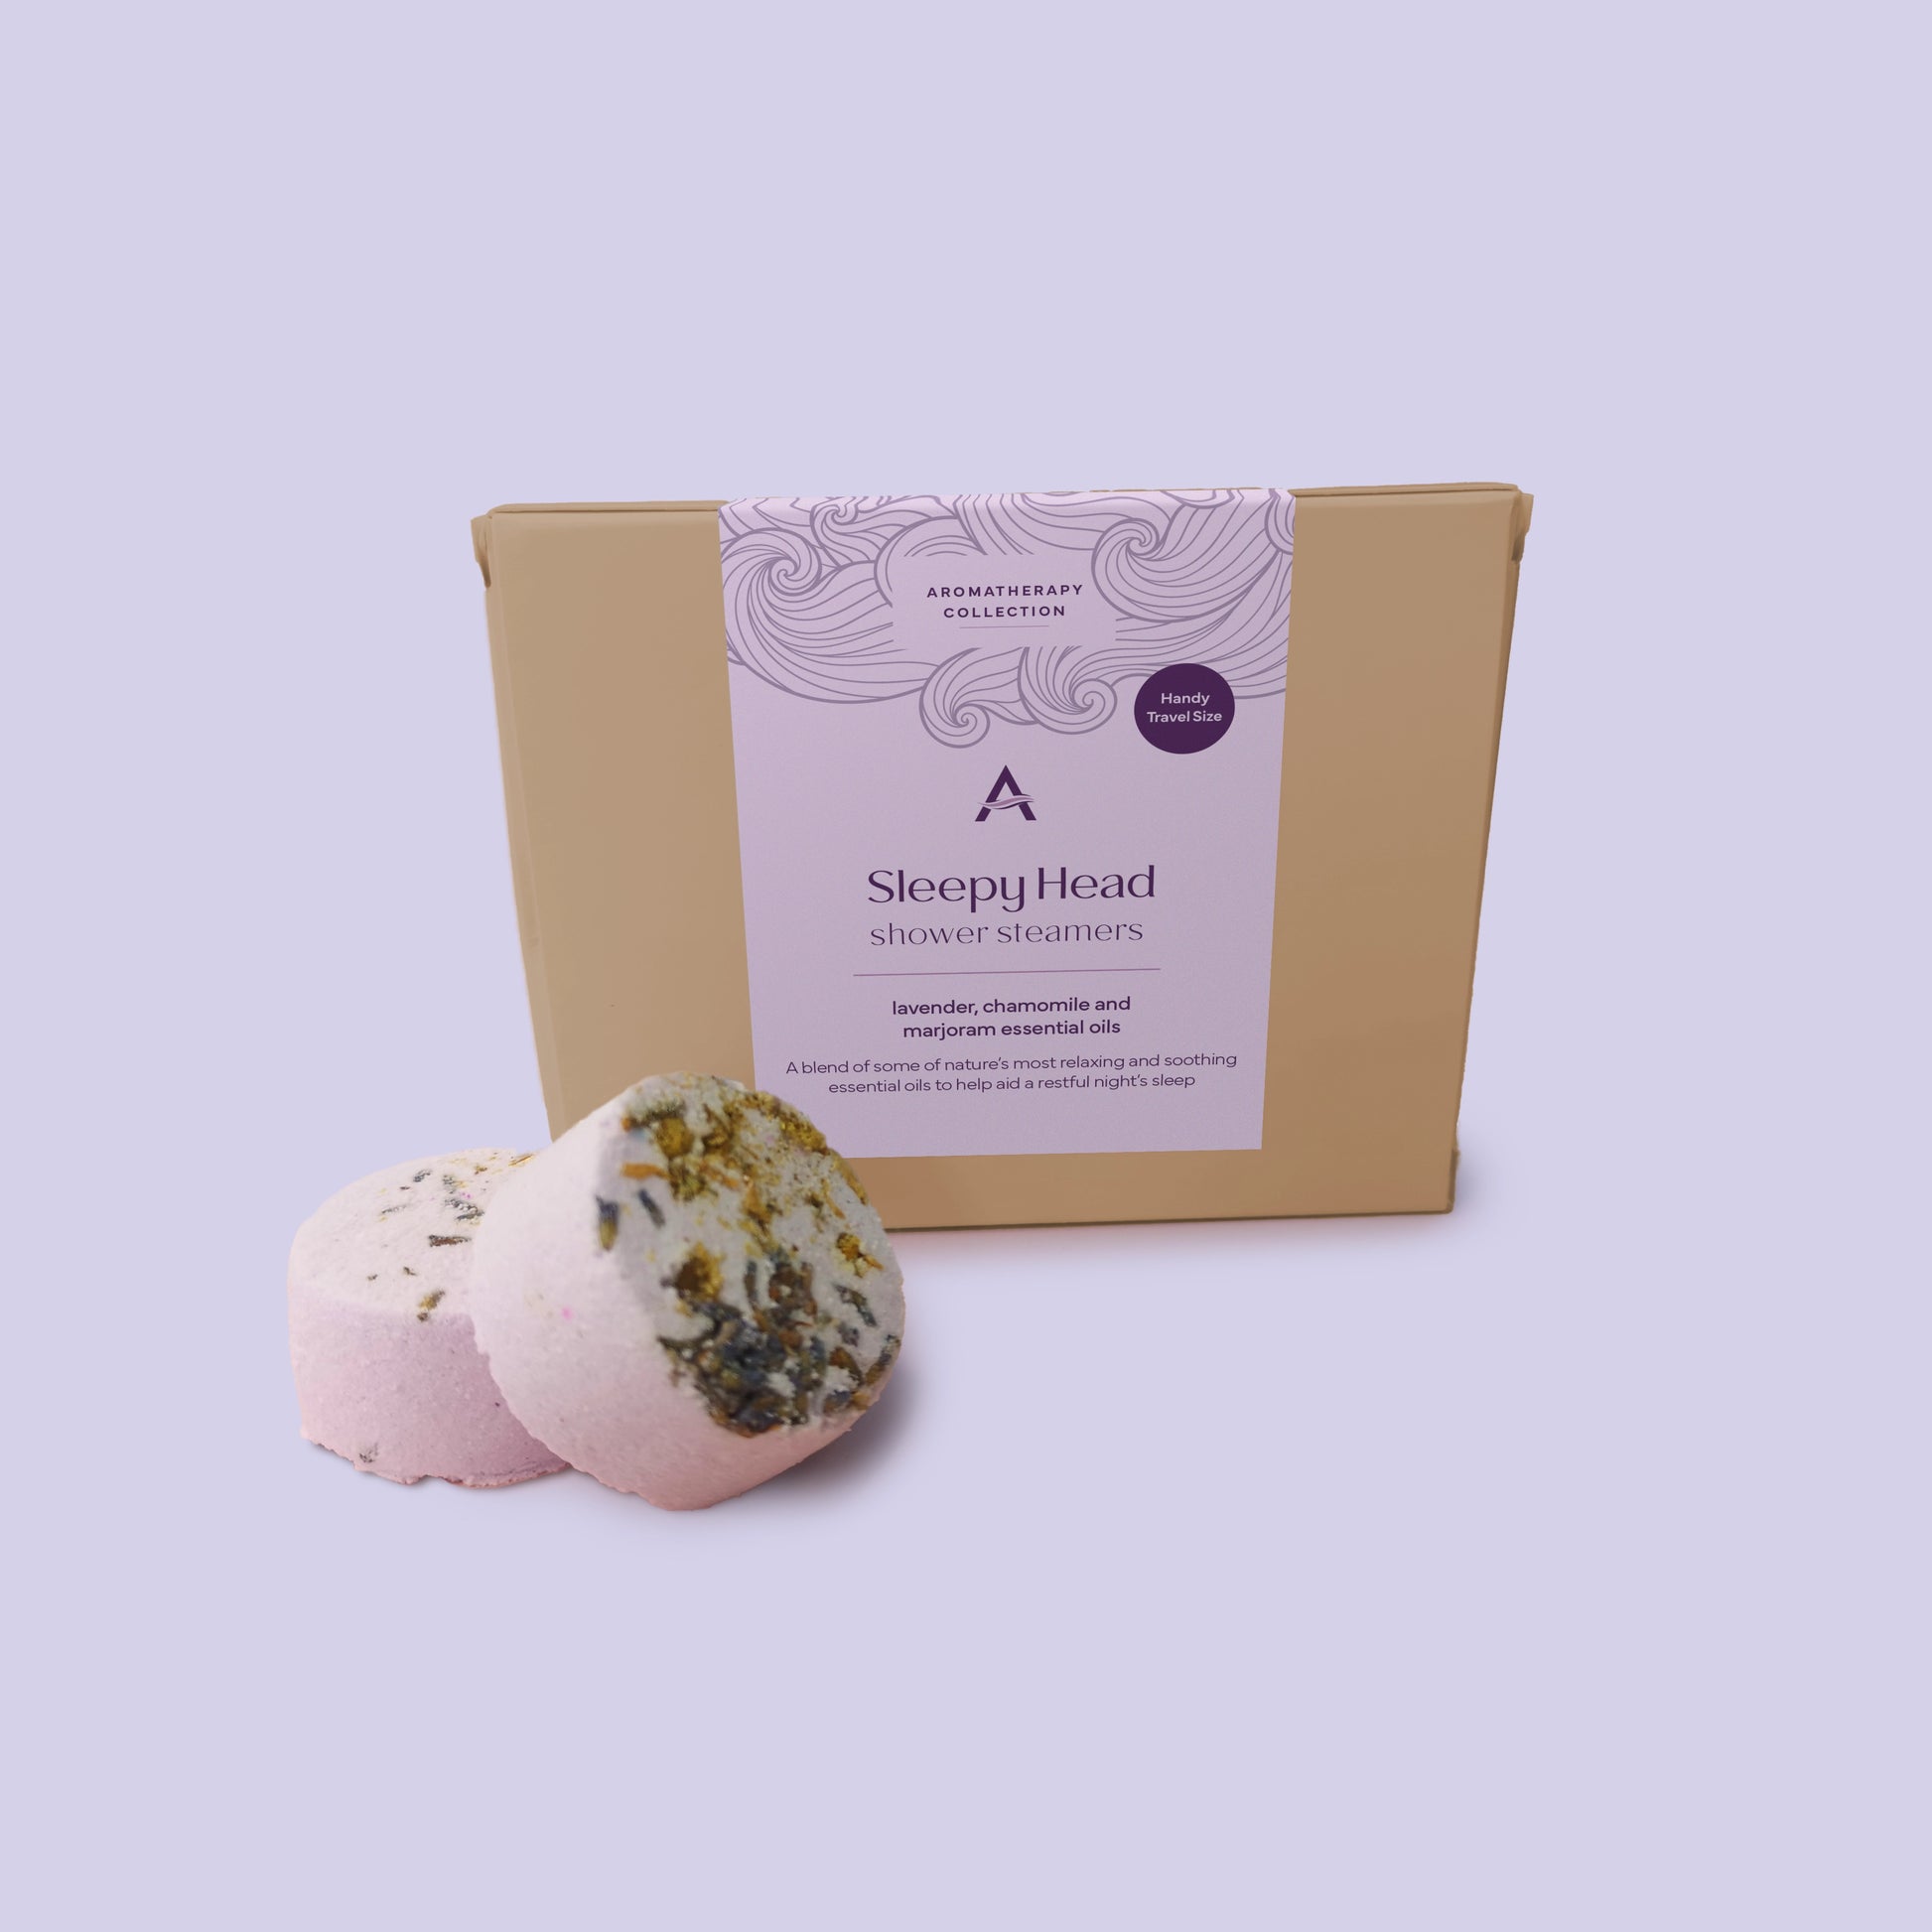 Sleepy Head relaxing lavender and chamomile shower steamers and box